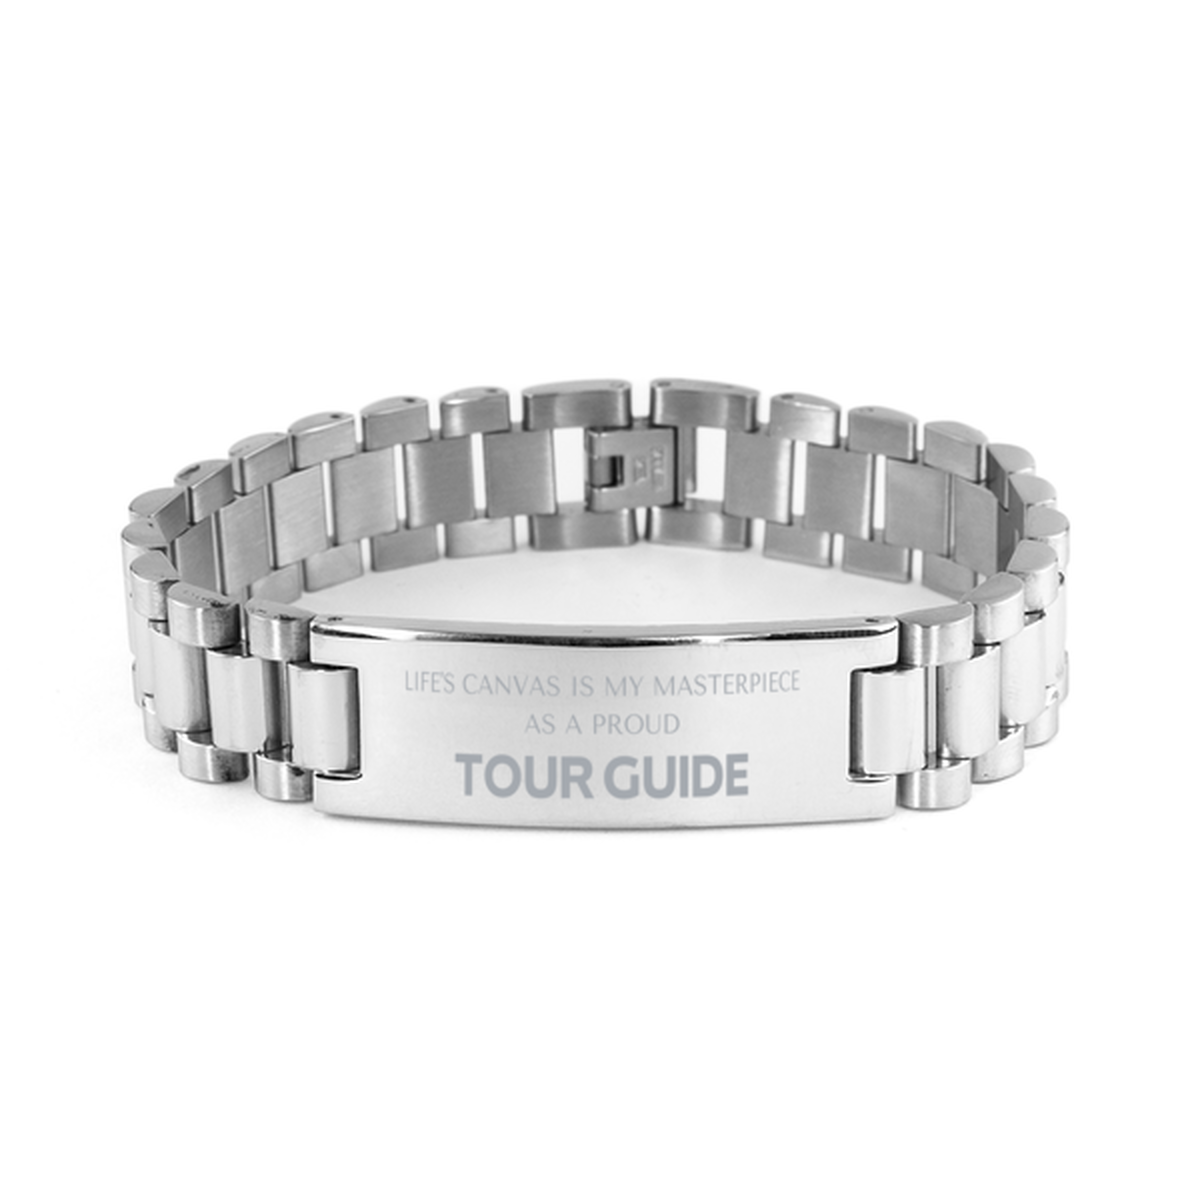 Proud Tour Guide Gifts, Life's canvas is my masterpiece, Epic Birthday Christmas Unique Ladder Stainless Steel Bracelet For Tour Guide, Coworkers, Men, Women, Friends